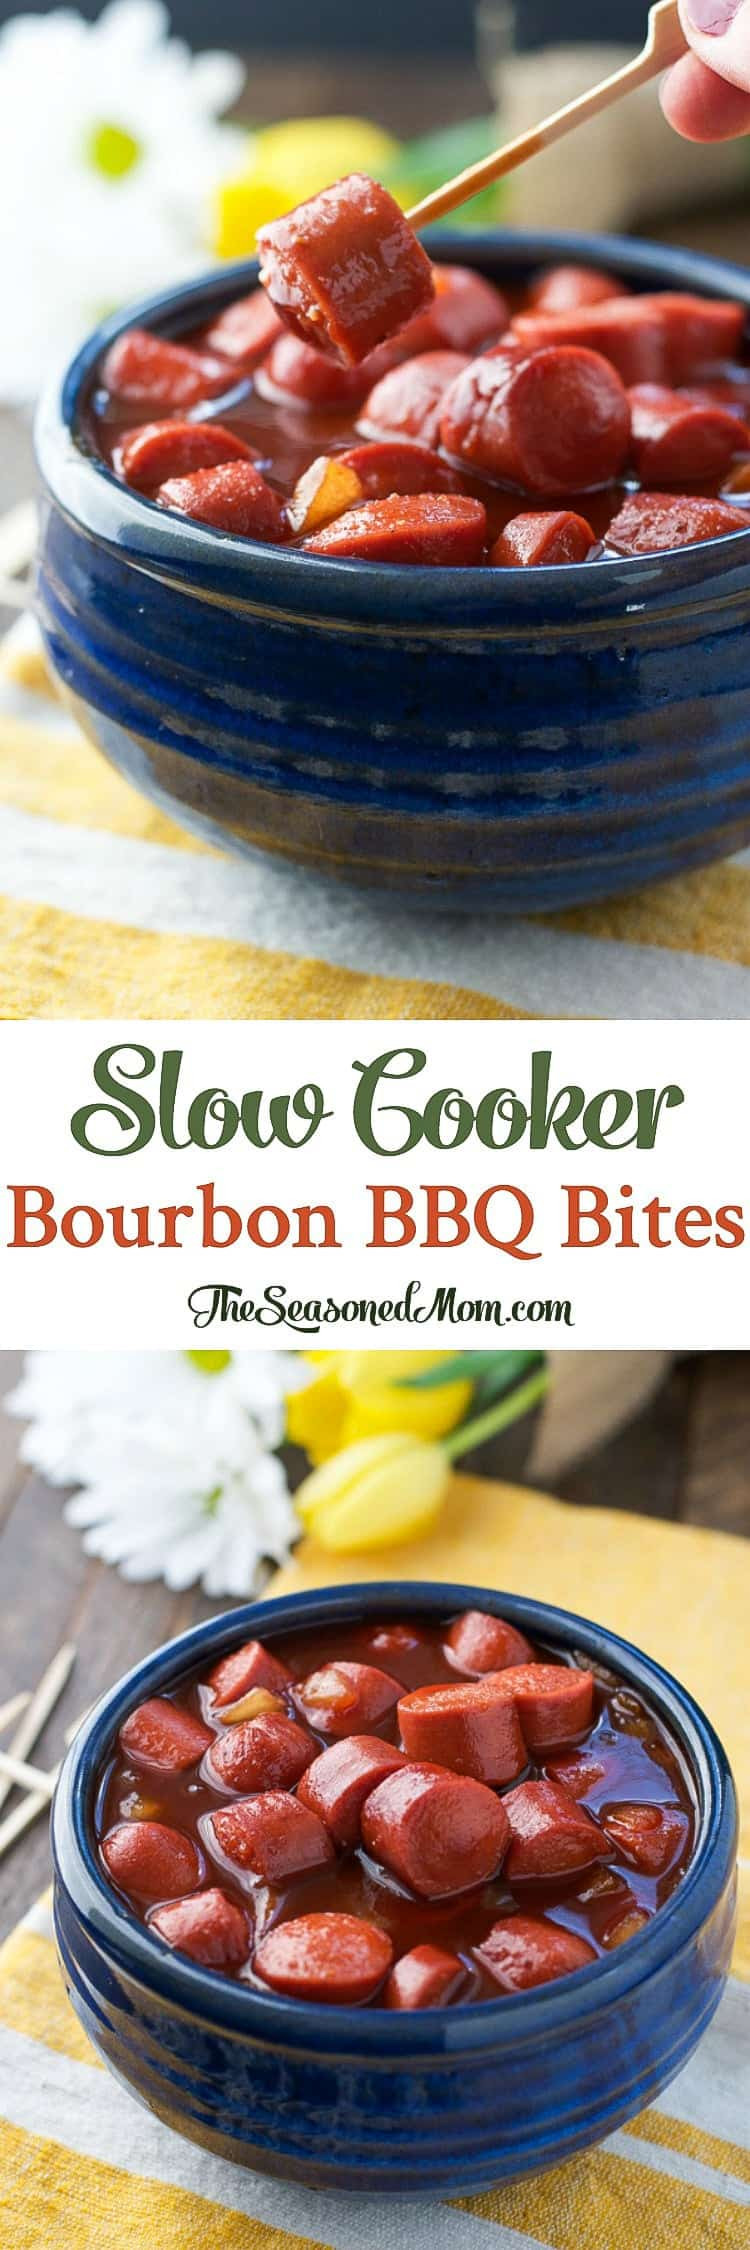 Slow Cooker Appetizers For Party
 Easy Appetizers Slow Cooker Bourbon Barbecue Bites The